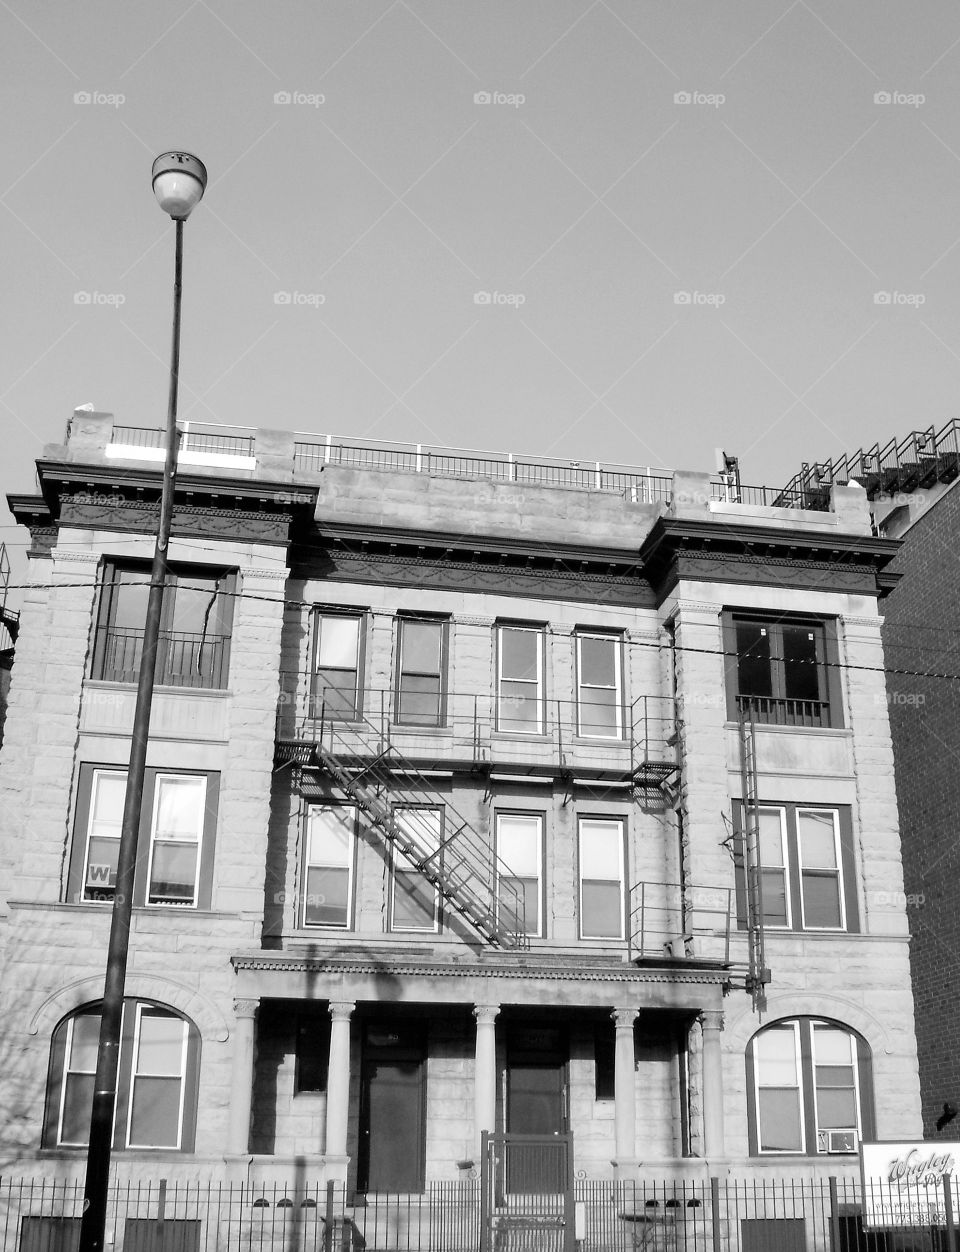 Vintage Chicago row house. Townhouse across from Wrigley field in Chicago.